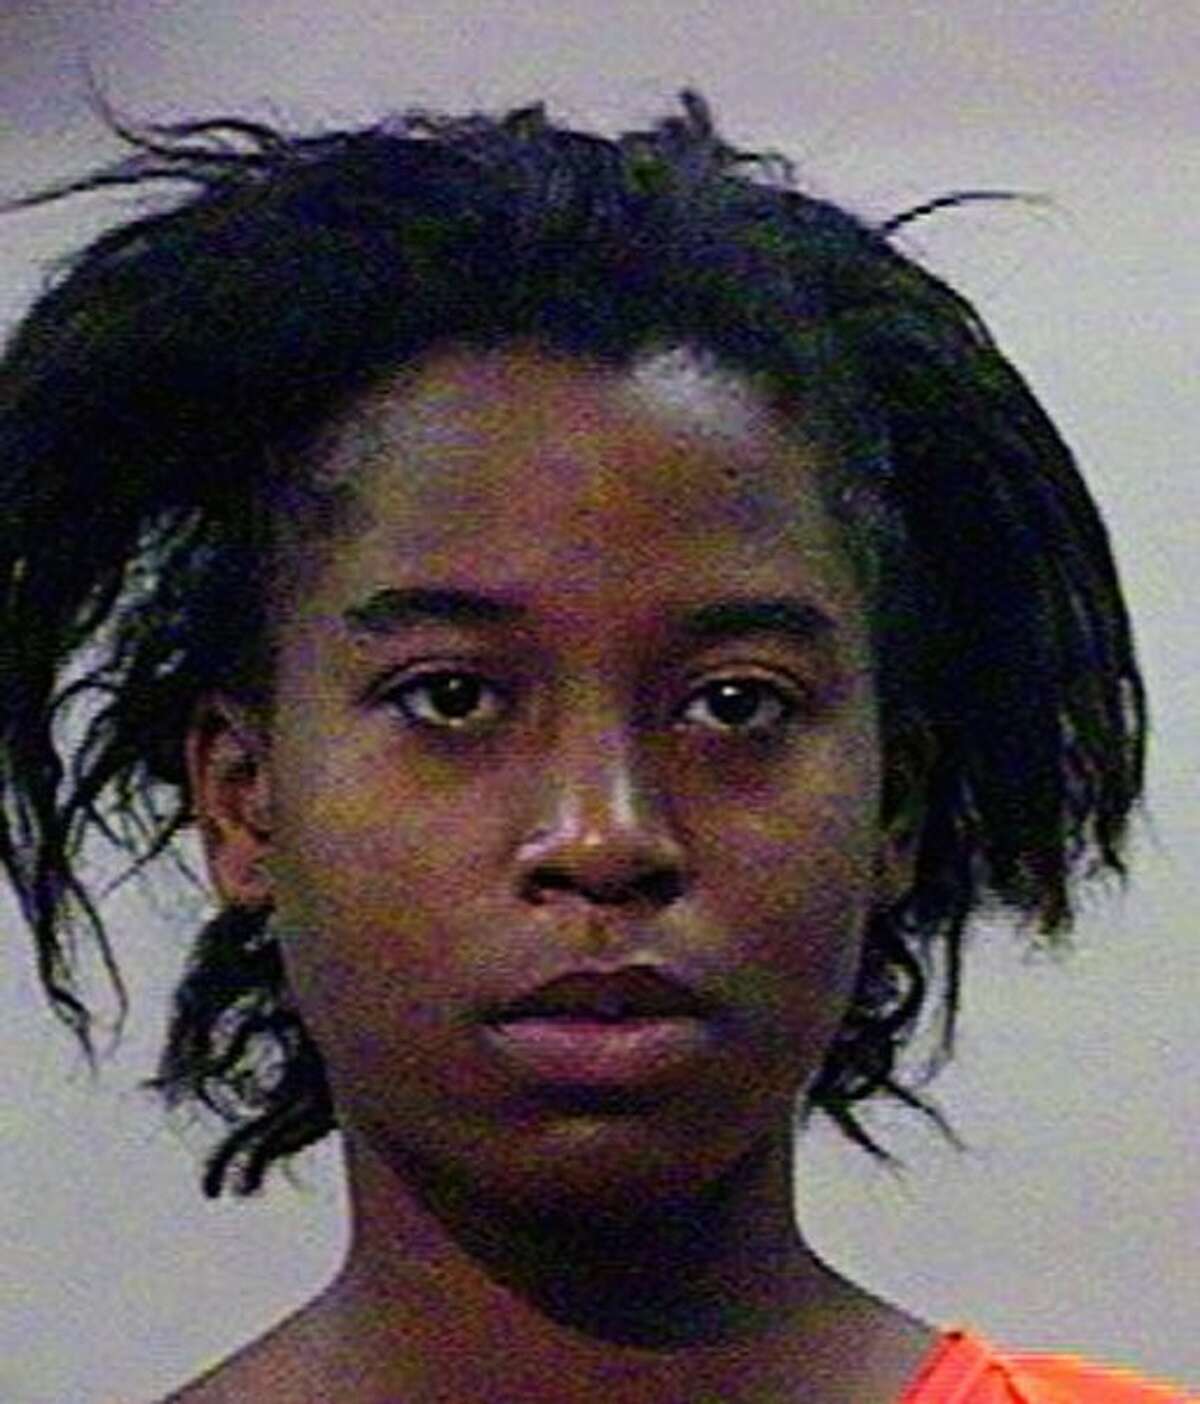 This file photo provided Tuesday by the Brazoria County Sheriff’s Office shows Kristi-An Walker. Angleton police say Walker, who is pregnant with her fourth child, has been charged in the deaths of her two infant sons. Walker remained jailed Tuesday on murder and two other charges relating to the deaths, which occurred in April 2011 and June.